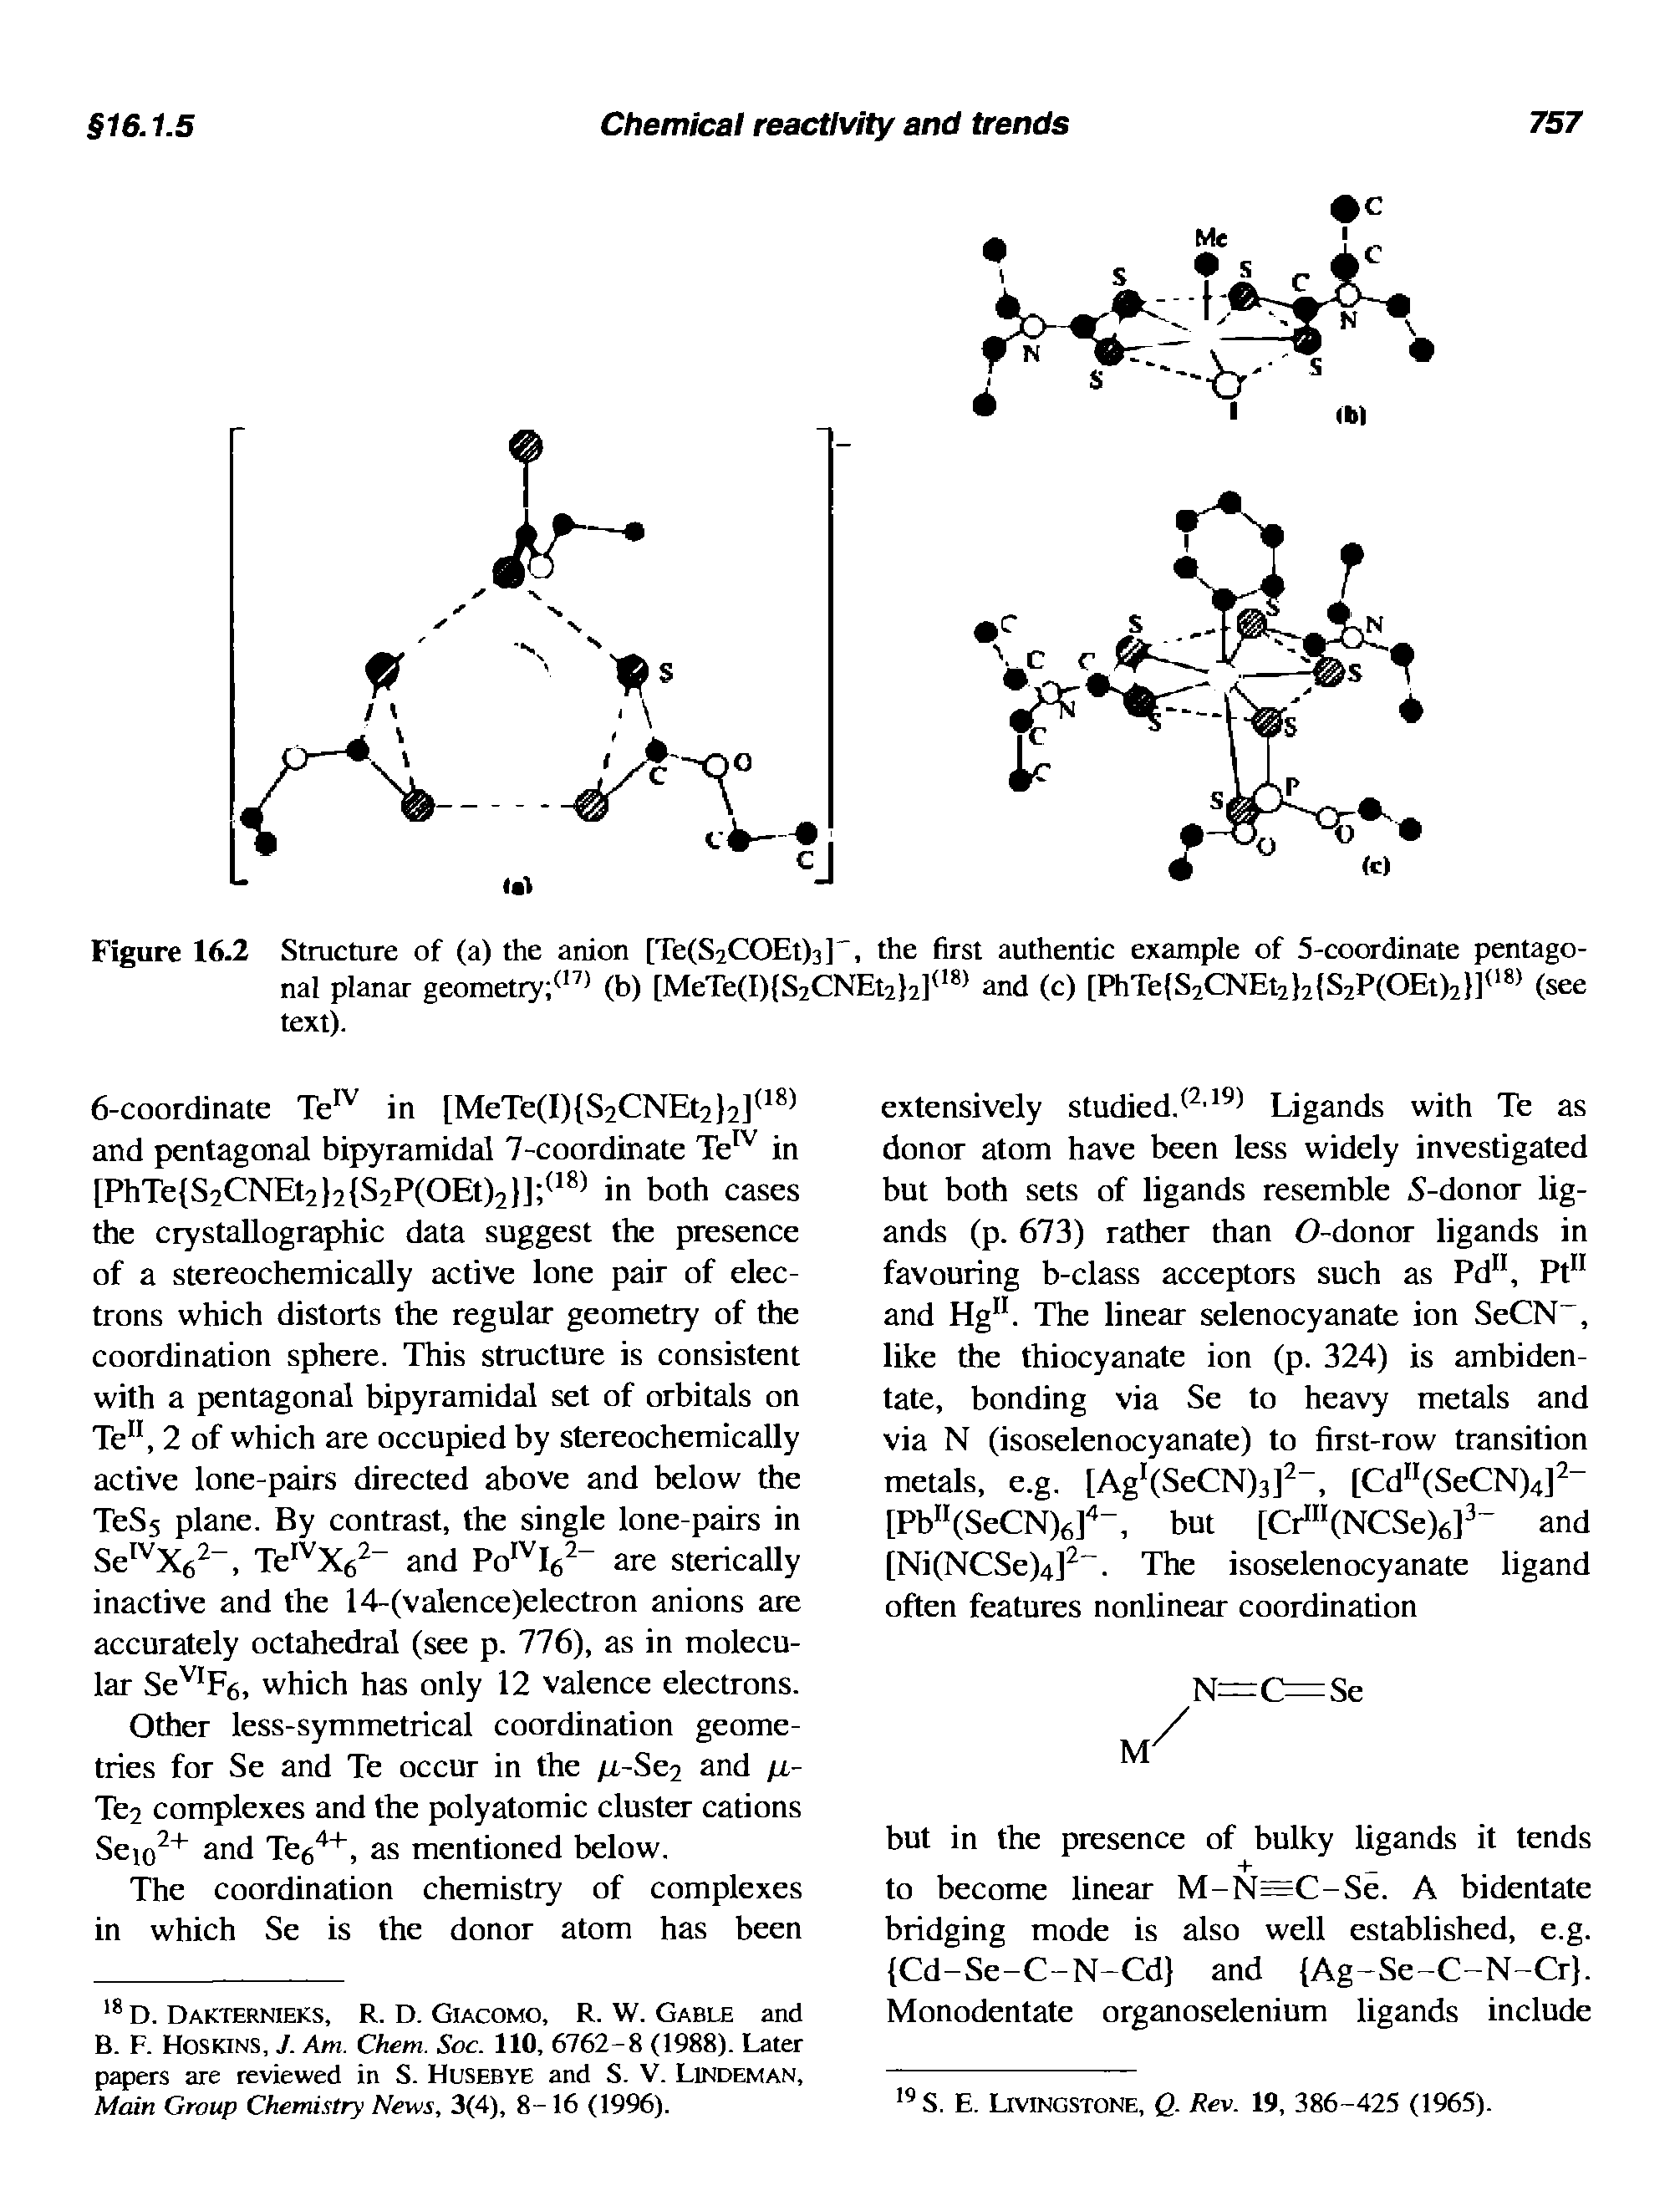 Figure 16.2 Structure of (a) the anion [Te(S2COEt)3]", the first authentic example of 5-coordinate pentagonal planar geometiy (b) [MeTe(I) S2CNEt2 2] and (c) [PhTe S2CNEt2 2 S2P(OEt)2 ] (see text).